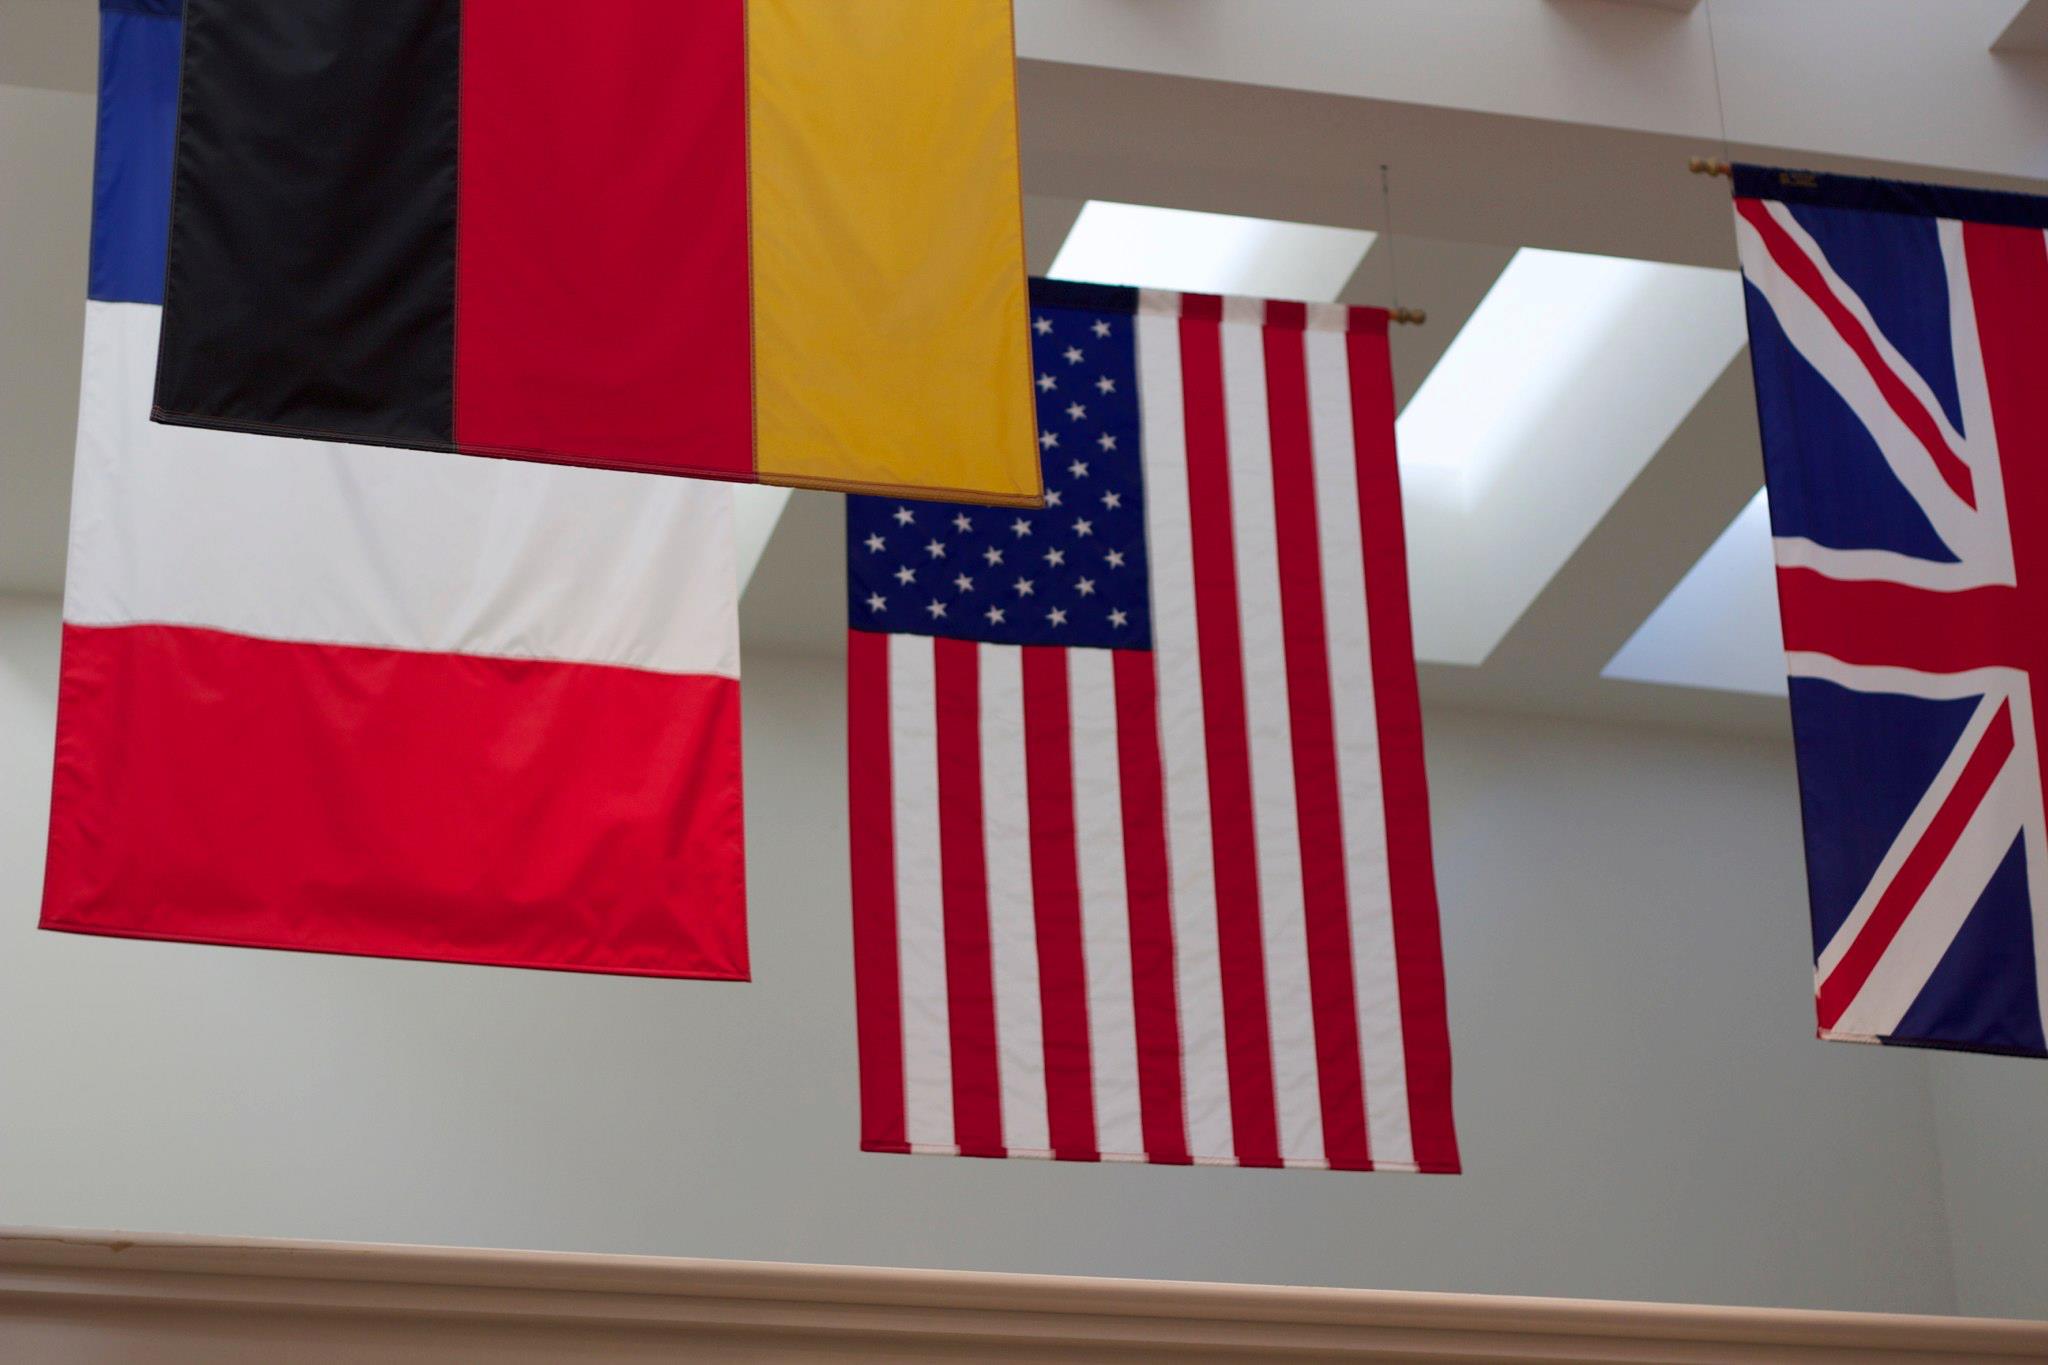 Image of flags hanging from the ceiling at the Nixon Presidential Library in Yorba Linda, California